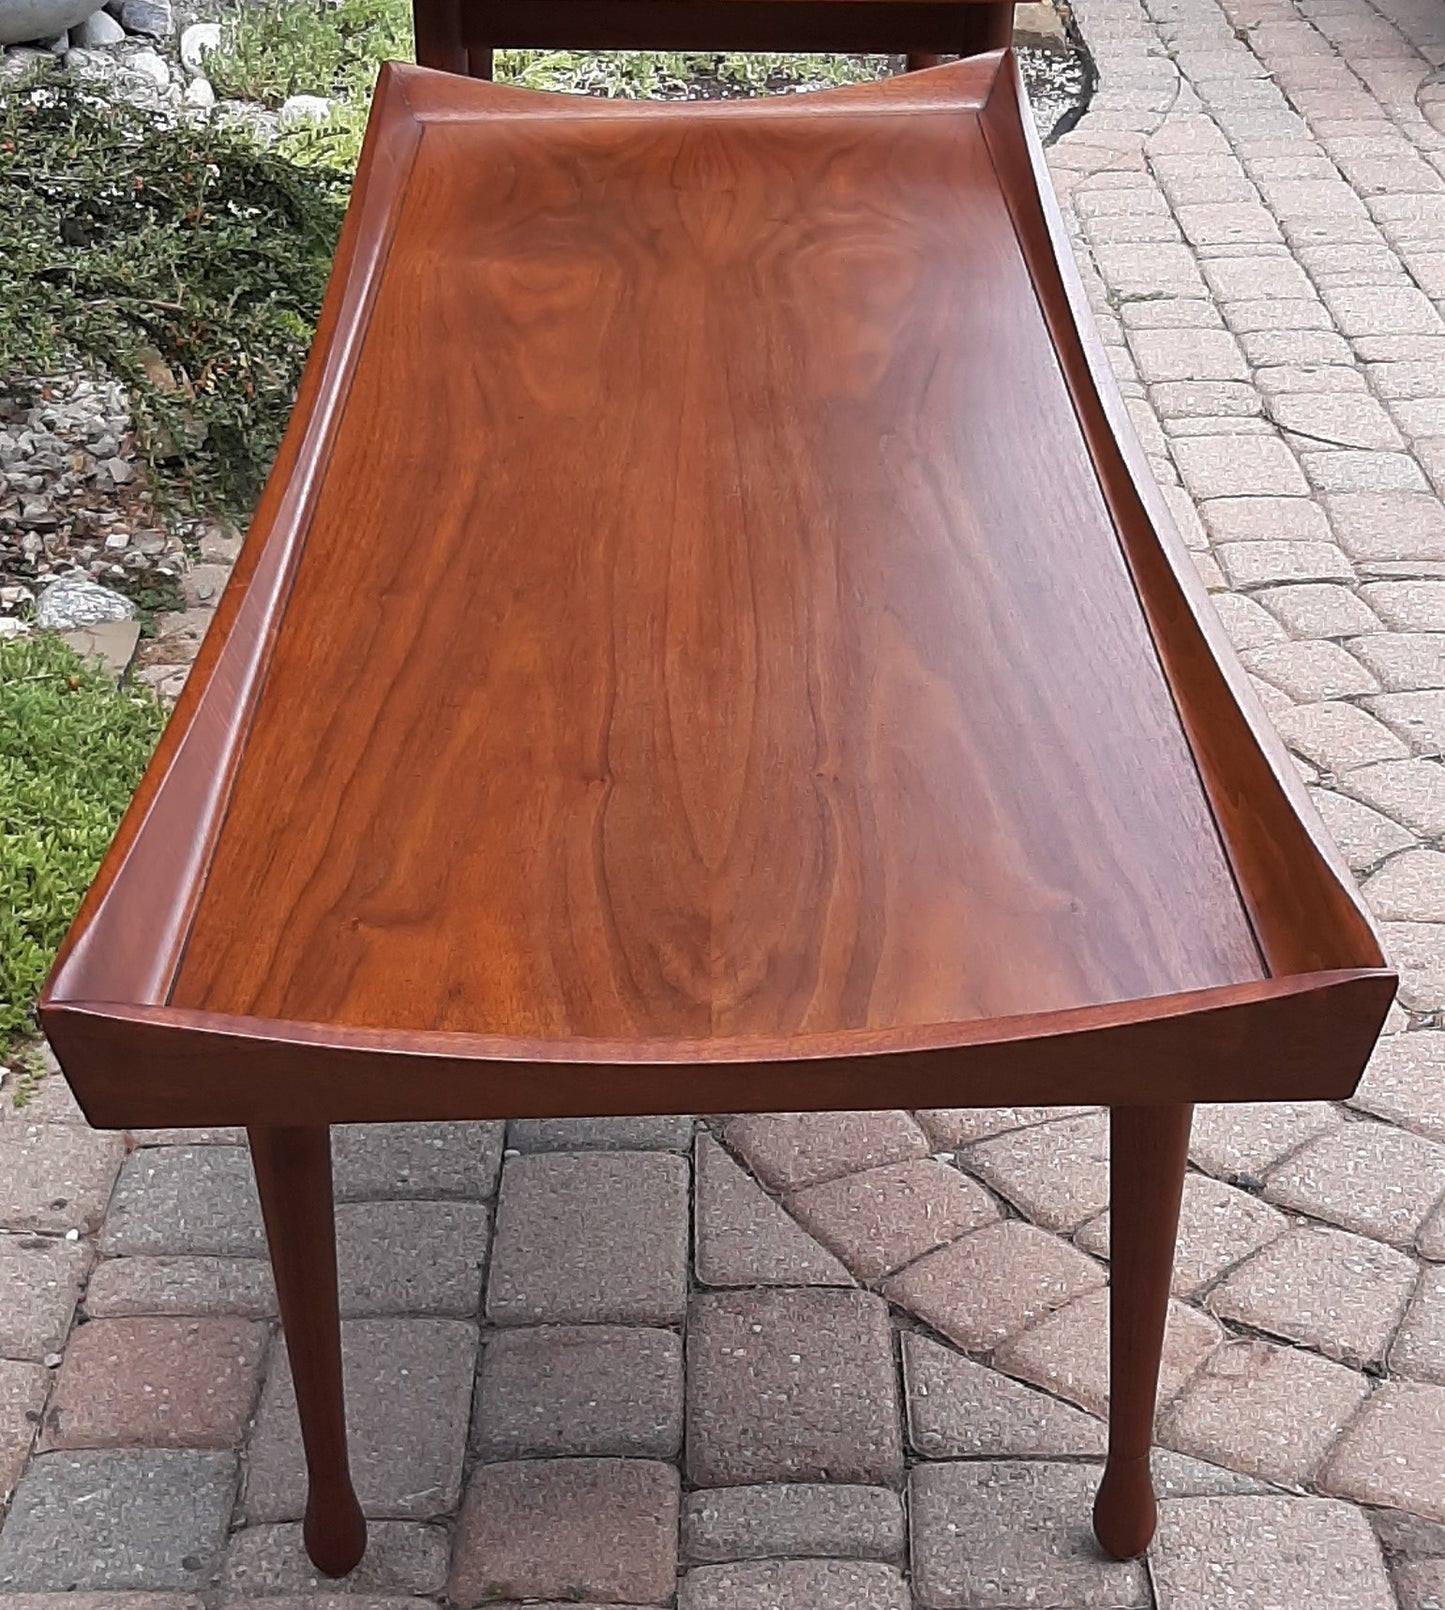 REFINISHED MCM Walnut Coffee Table by Deilcraft 5ft, PERFECT